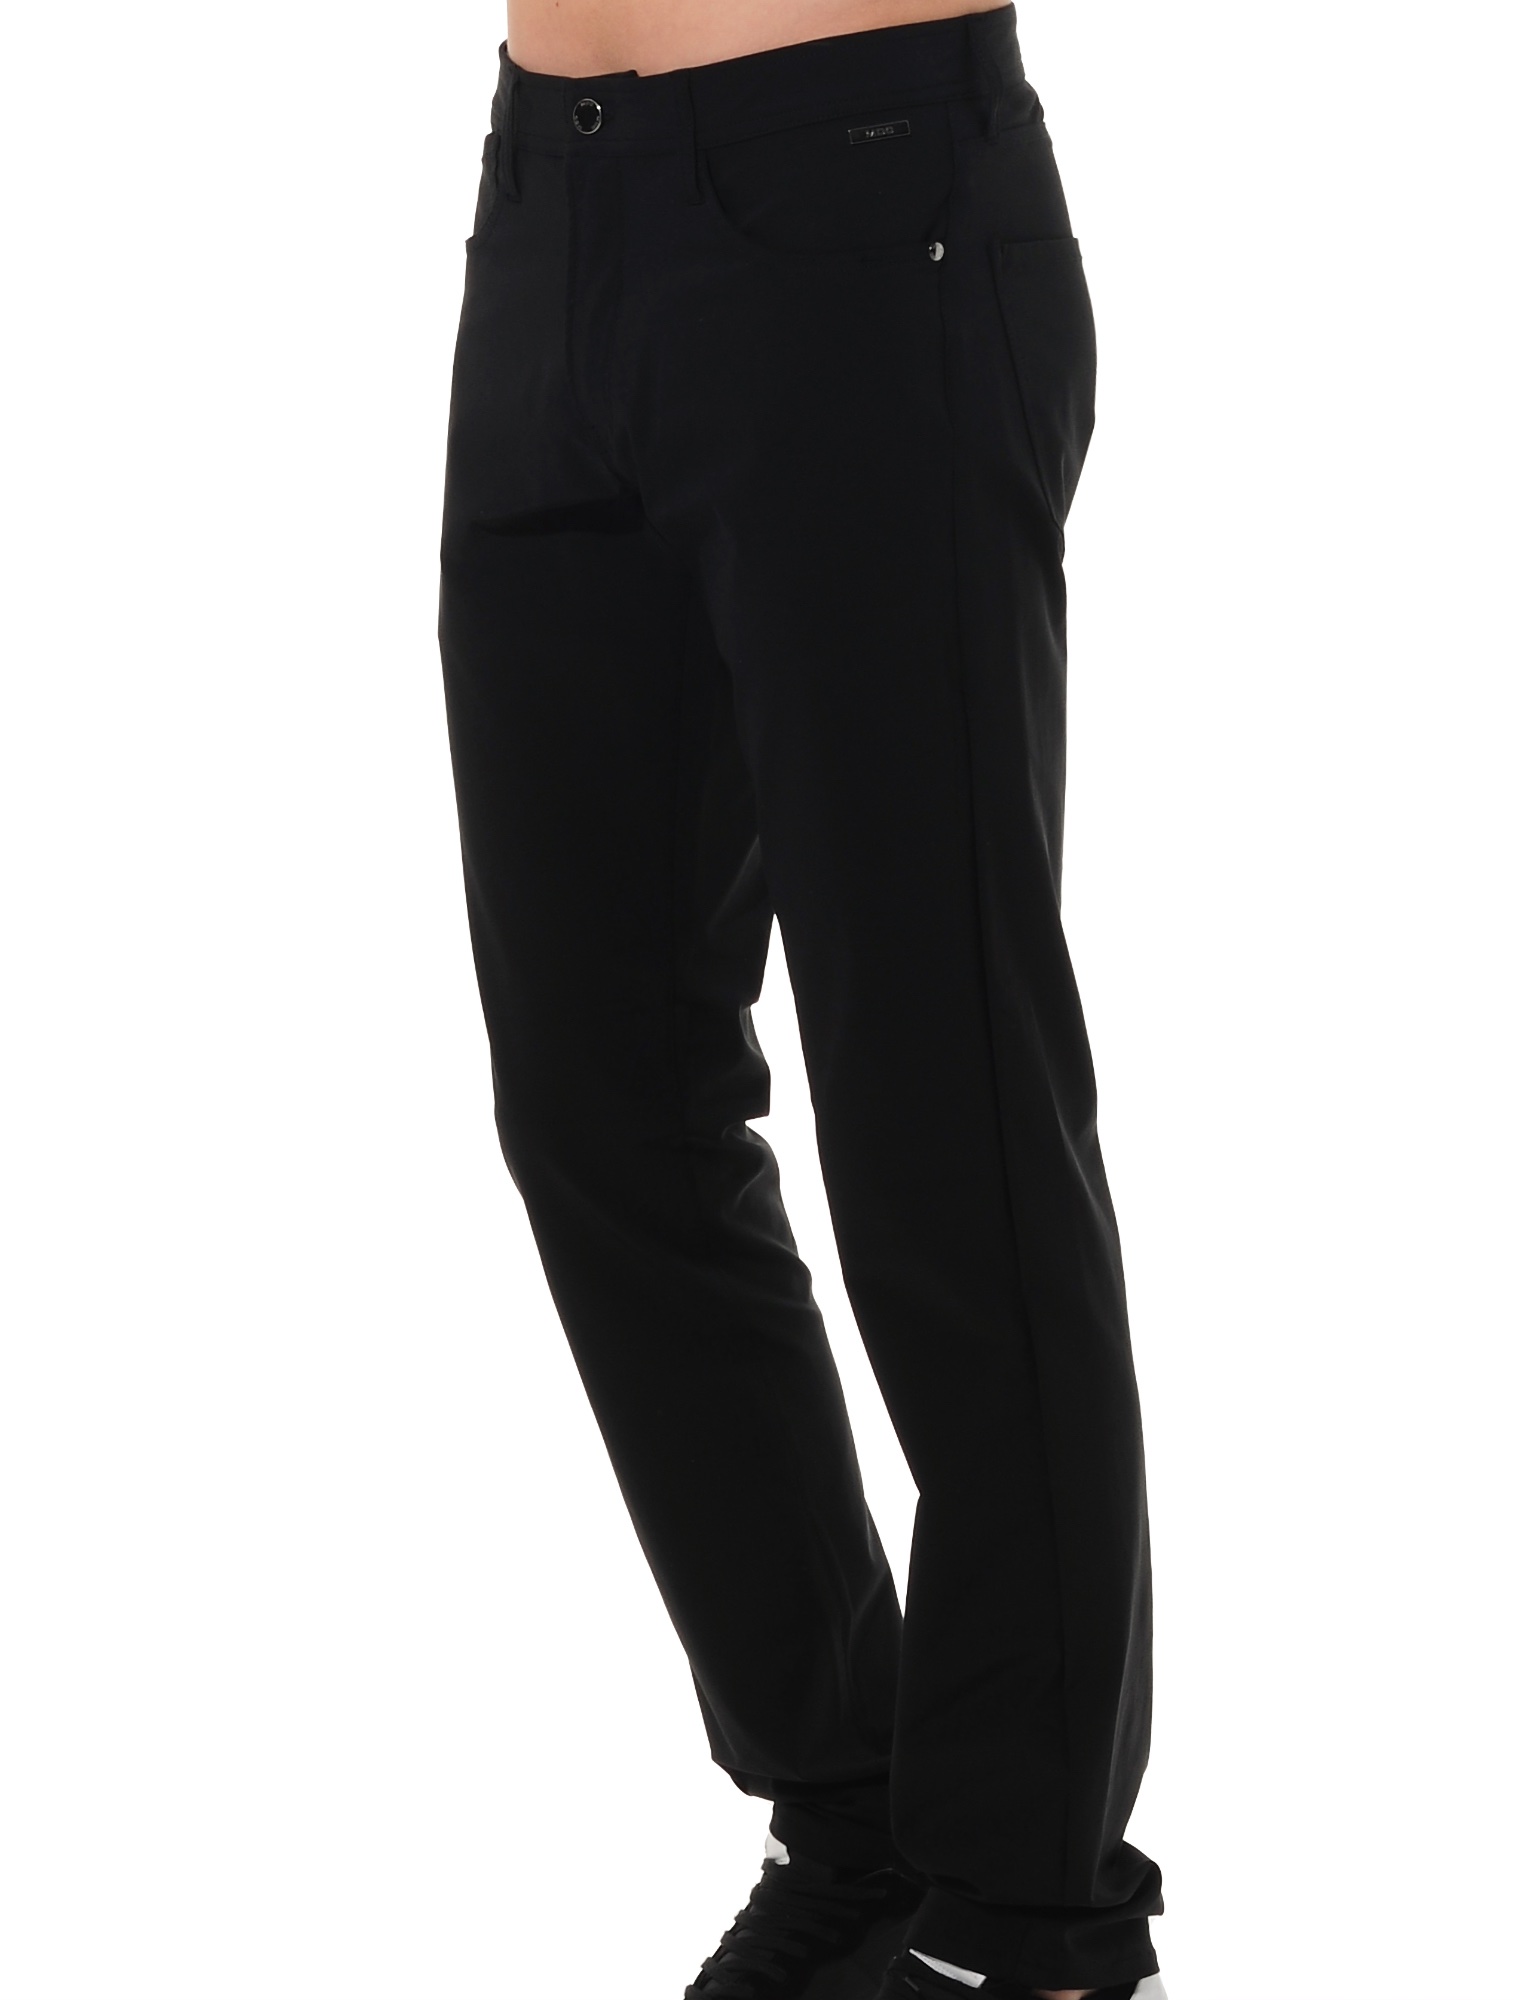 4way stretch relaxed fit jeans black